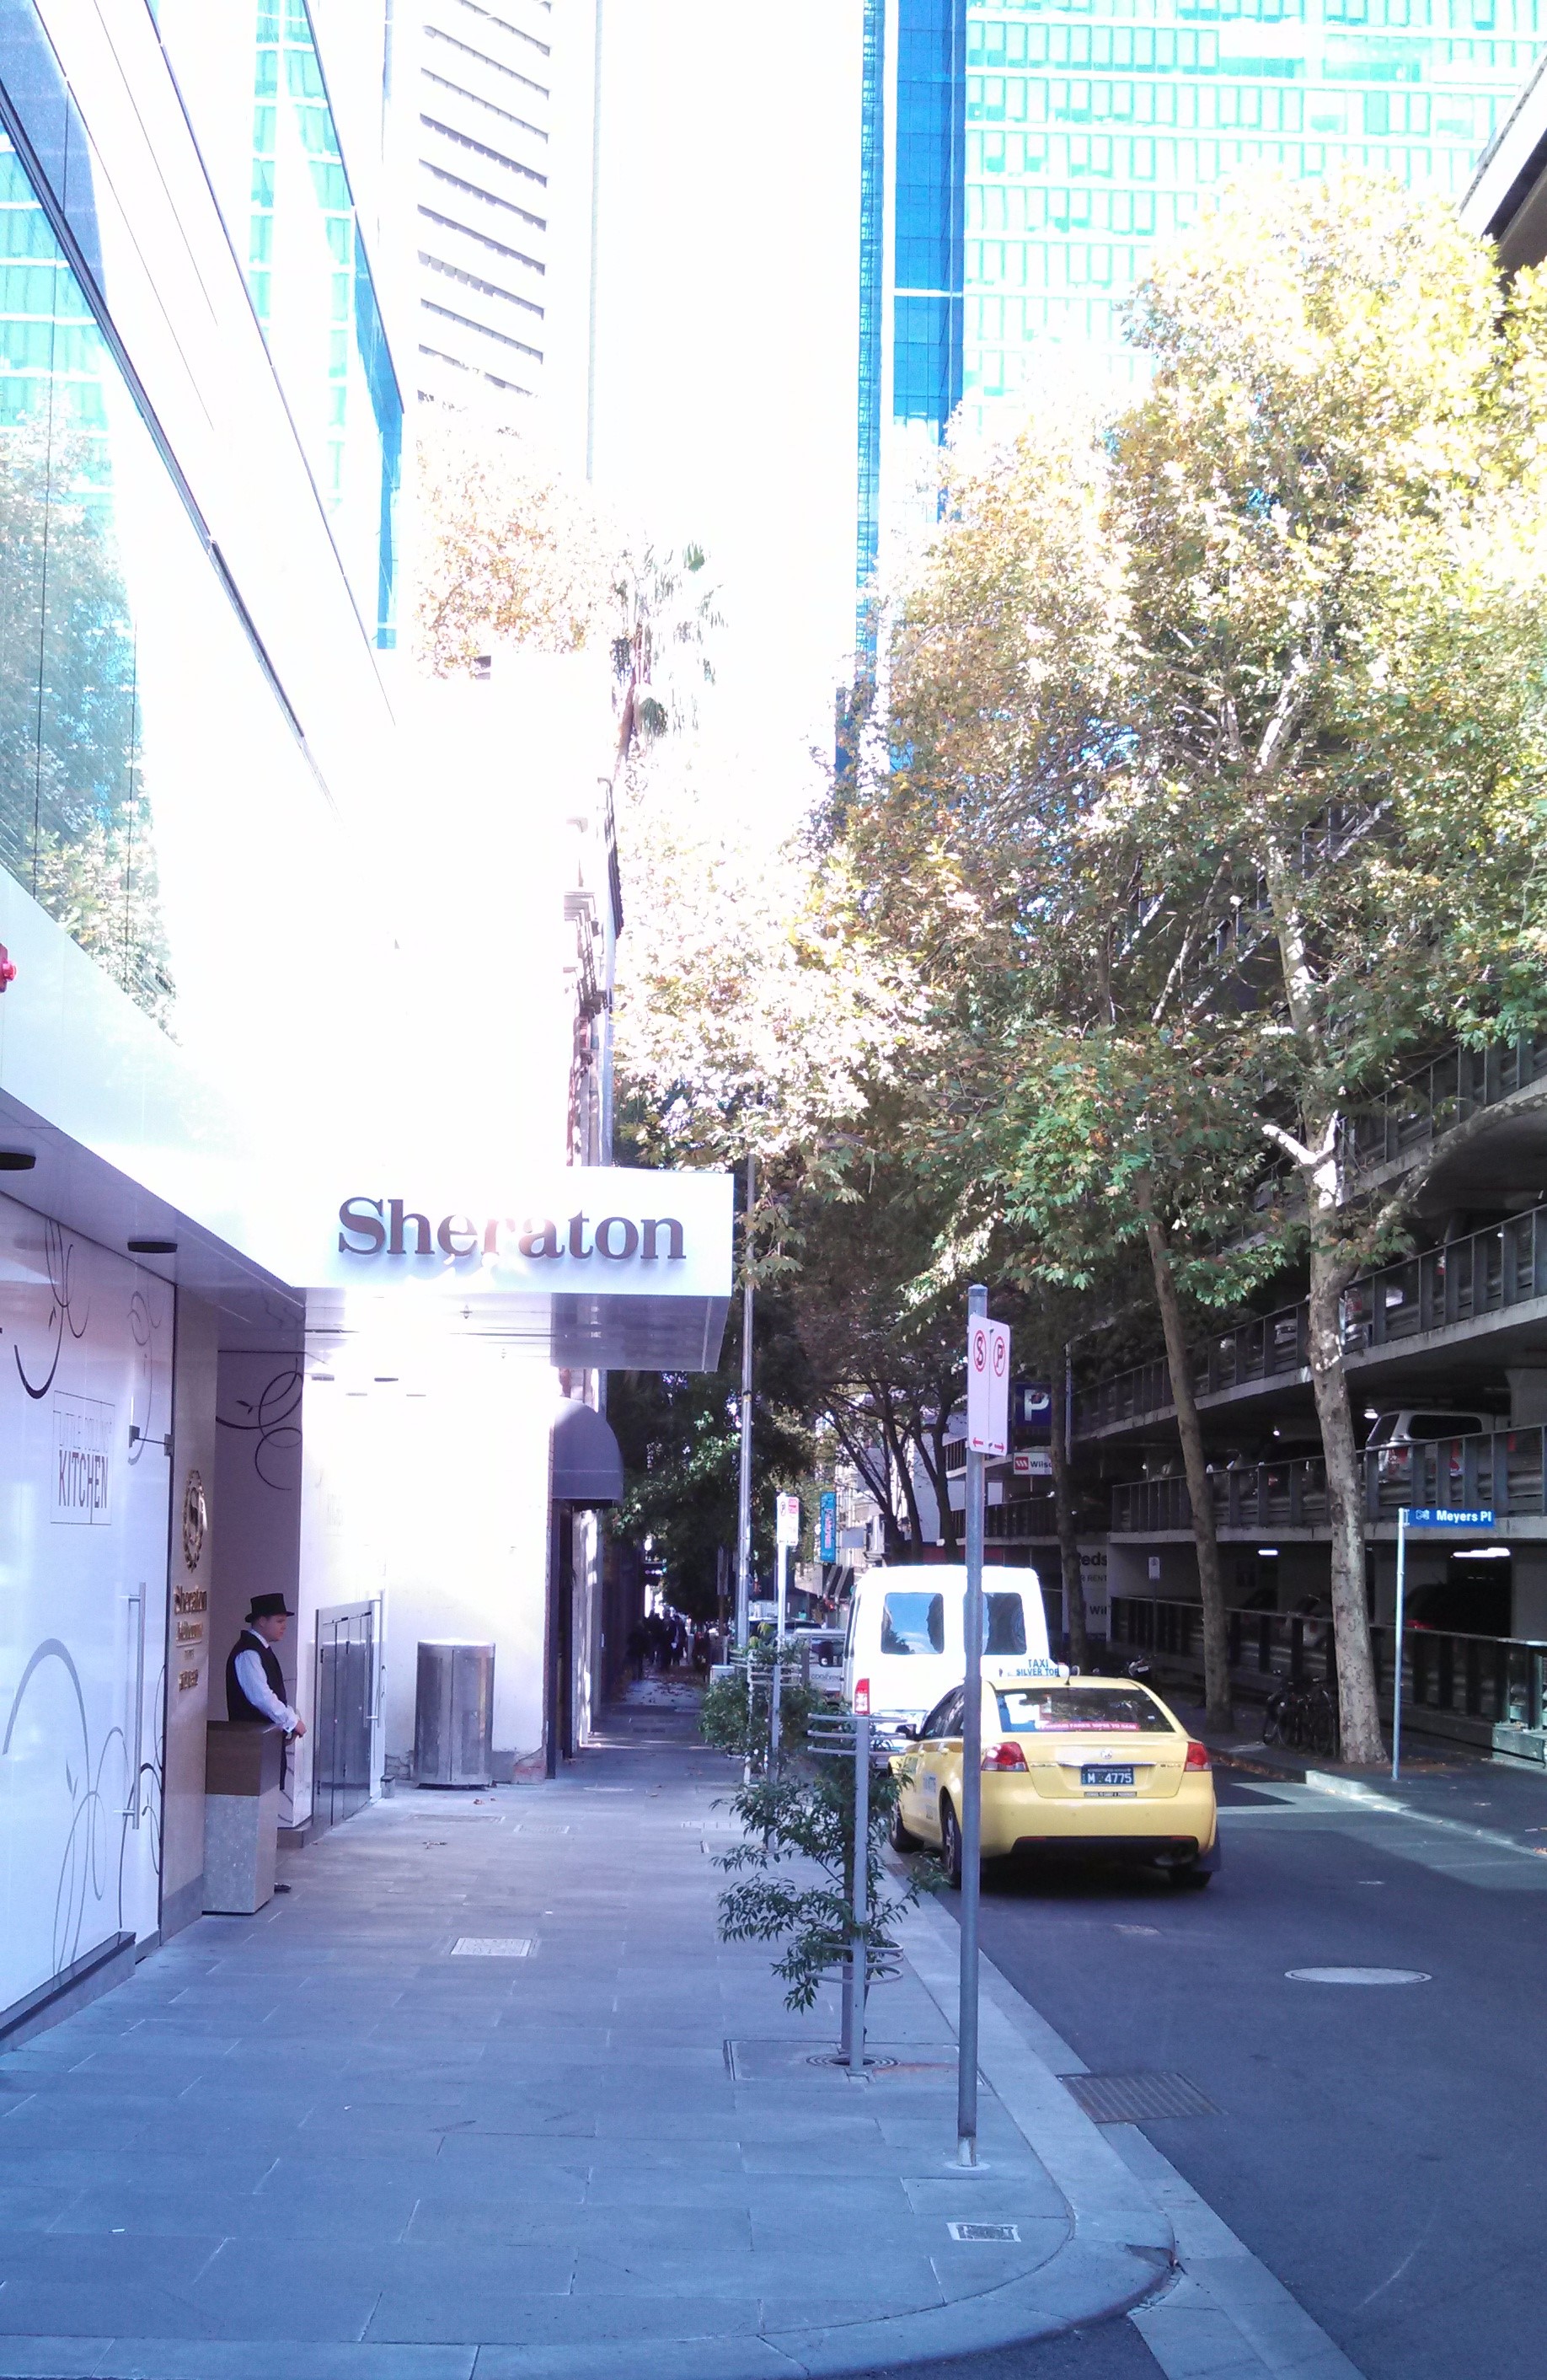 Sheraton Hotel in Melbourne - click to see an enlarged version of this image